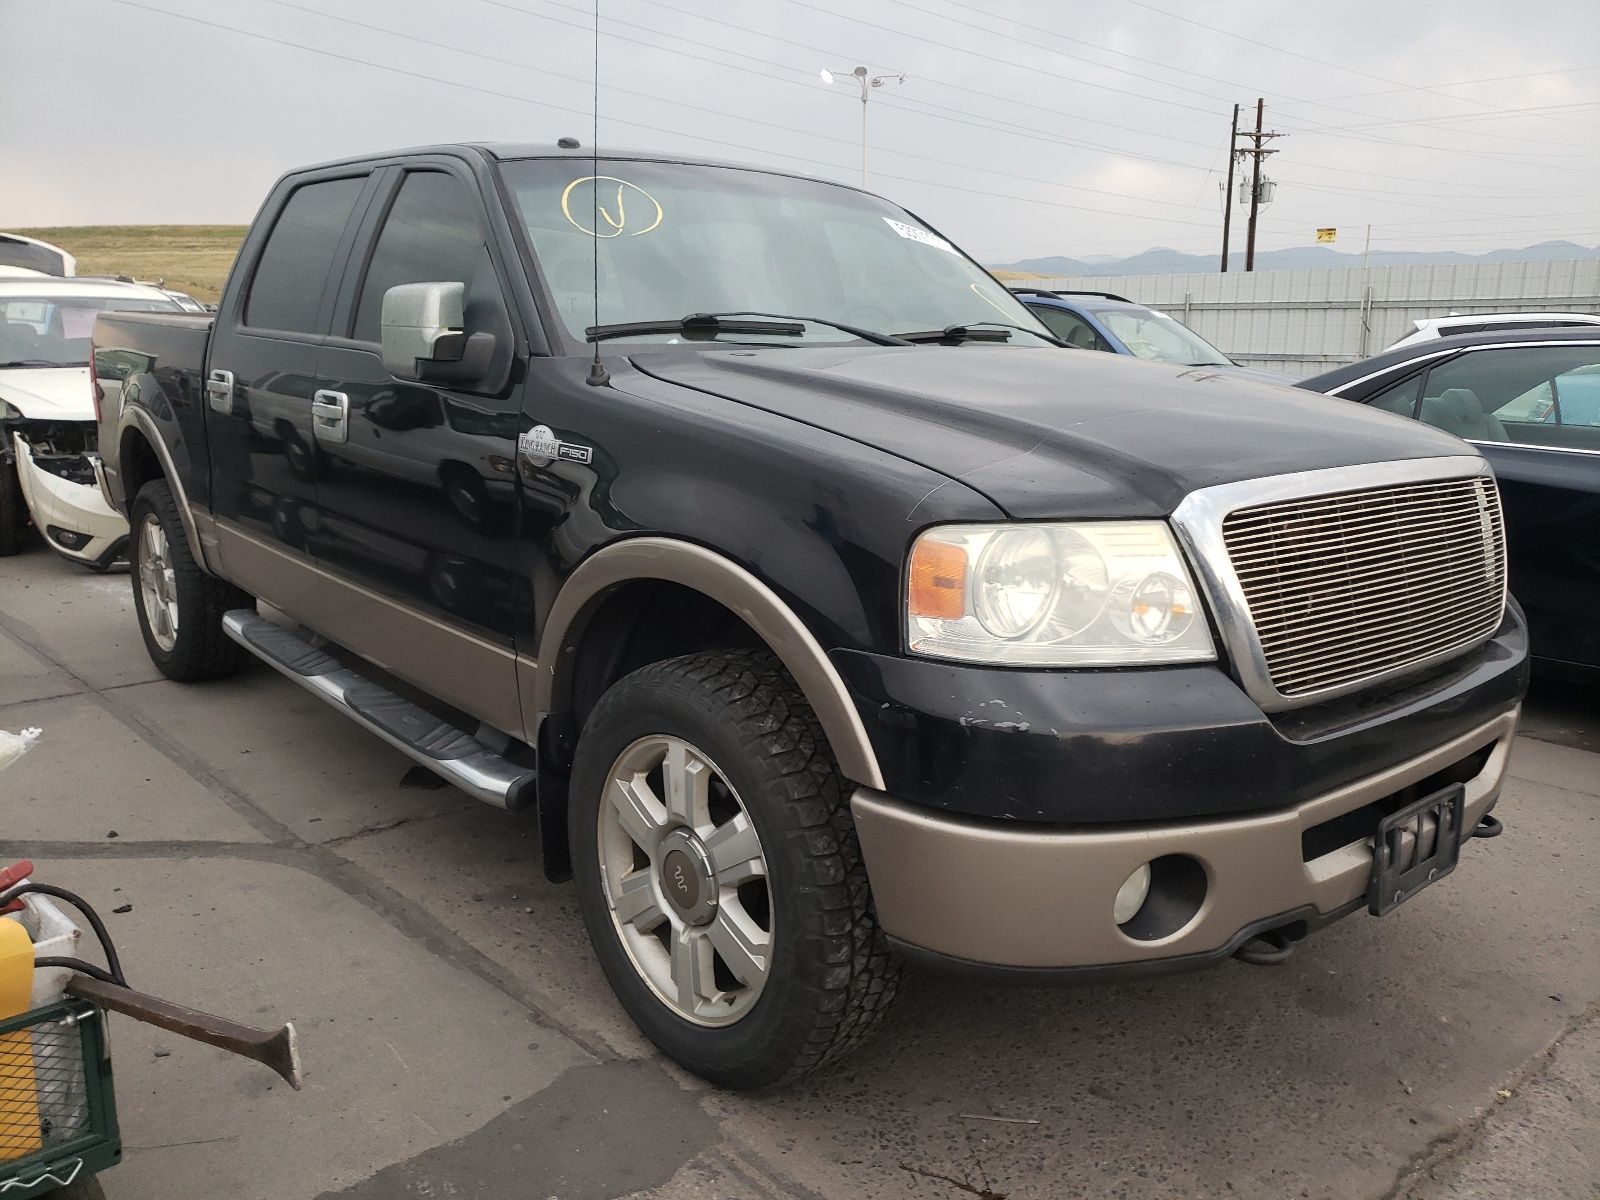 1 of 1FTPW14V36KD63401 Ford f series 2006